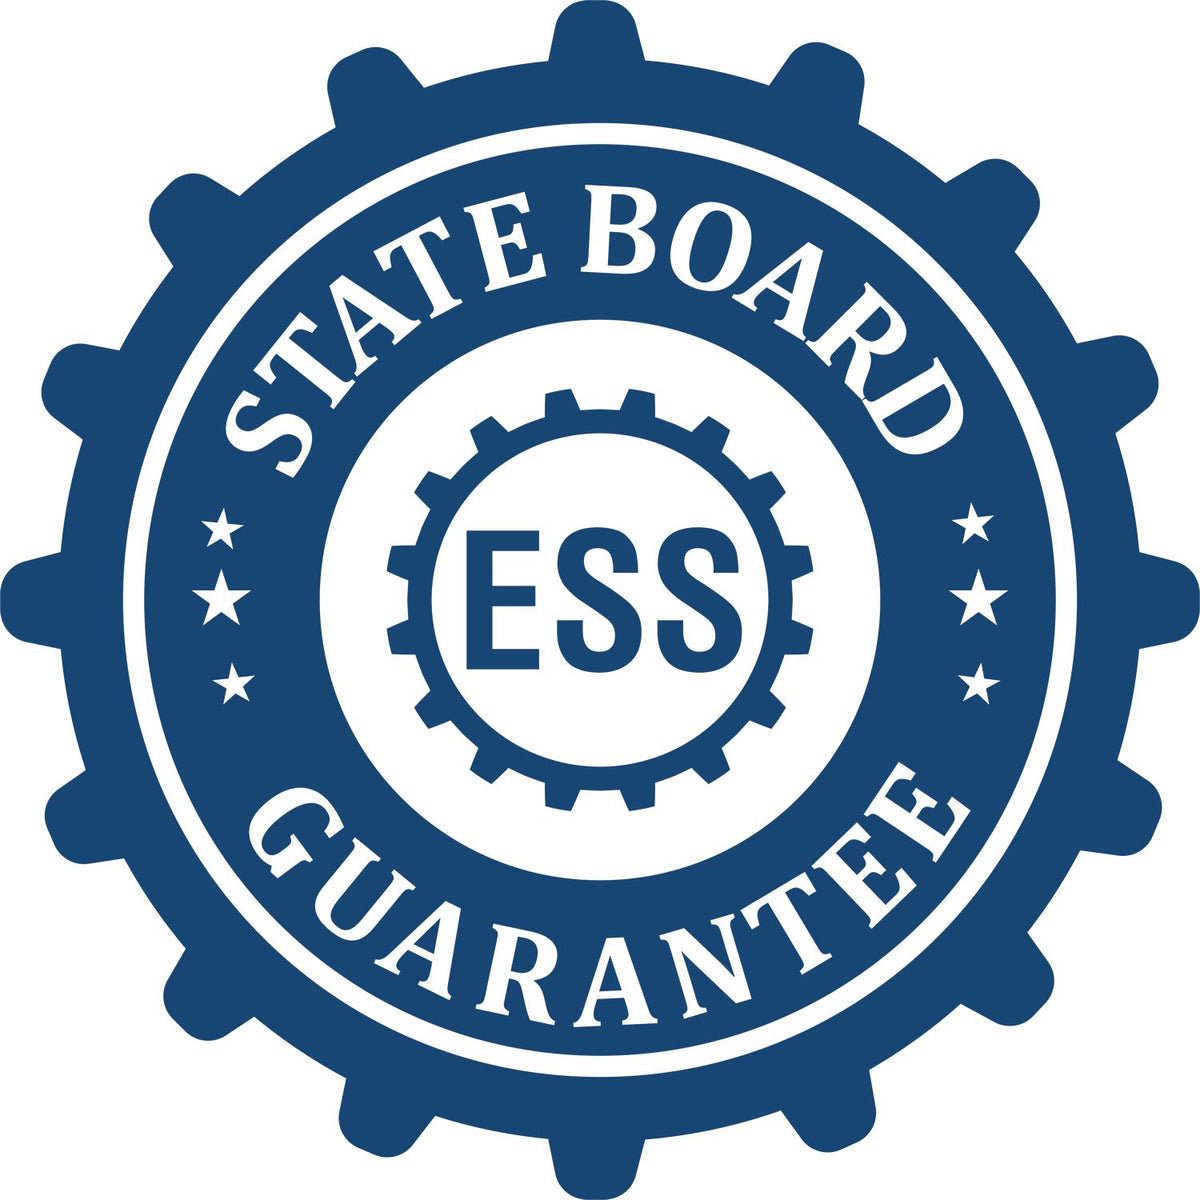 An emblem in a gear shape illustrating a state board guarantee for the Soft Minnesota Professional Engineer Seal product.